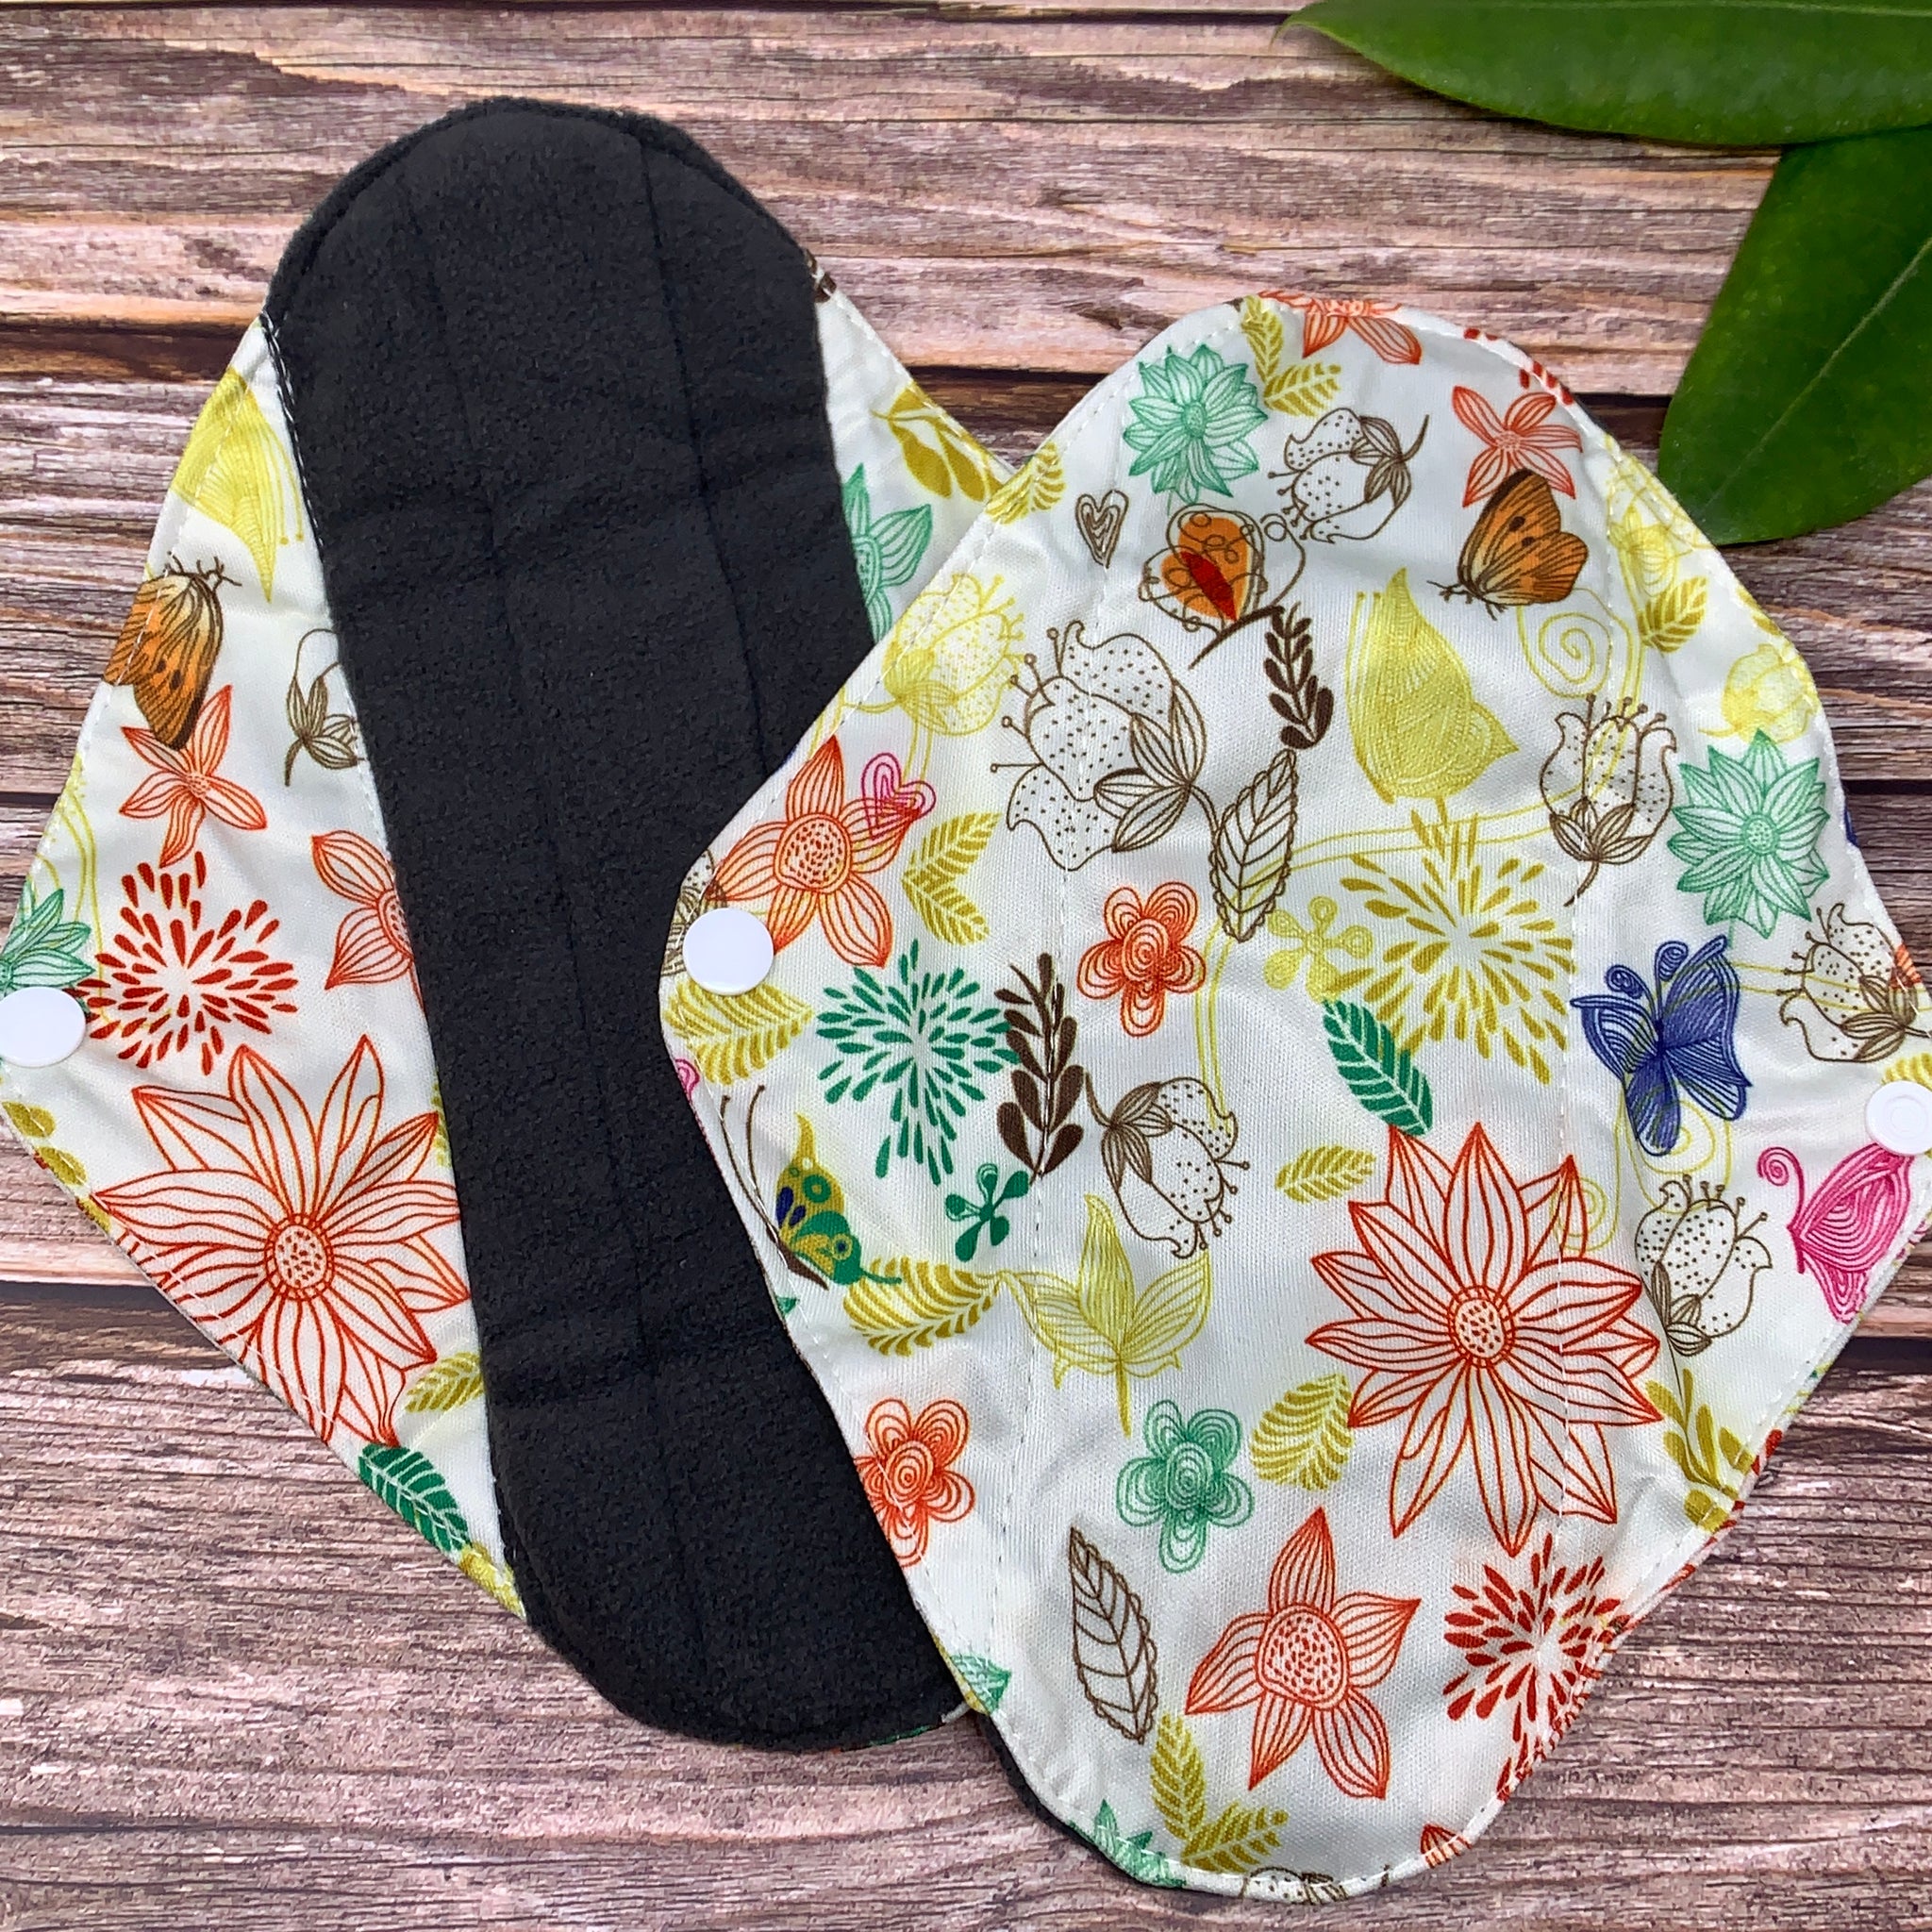 Tampon Tribe - Reusable Menstrual Pads (2 Pack) - Zero Waste Organic Cotton  Cloth Pads - Washable, Leak Free, Odor Free, Toxin Free, Eco Friendly